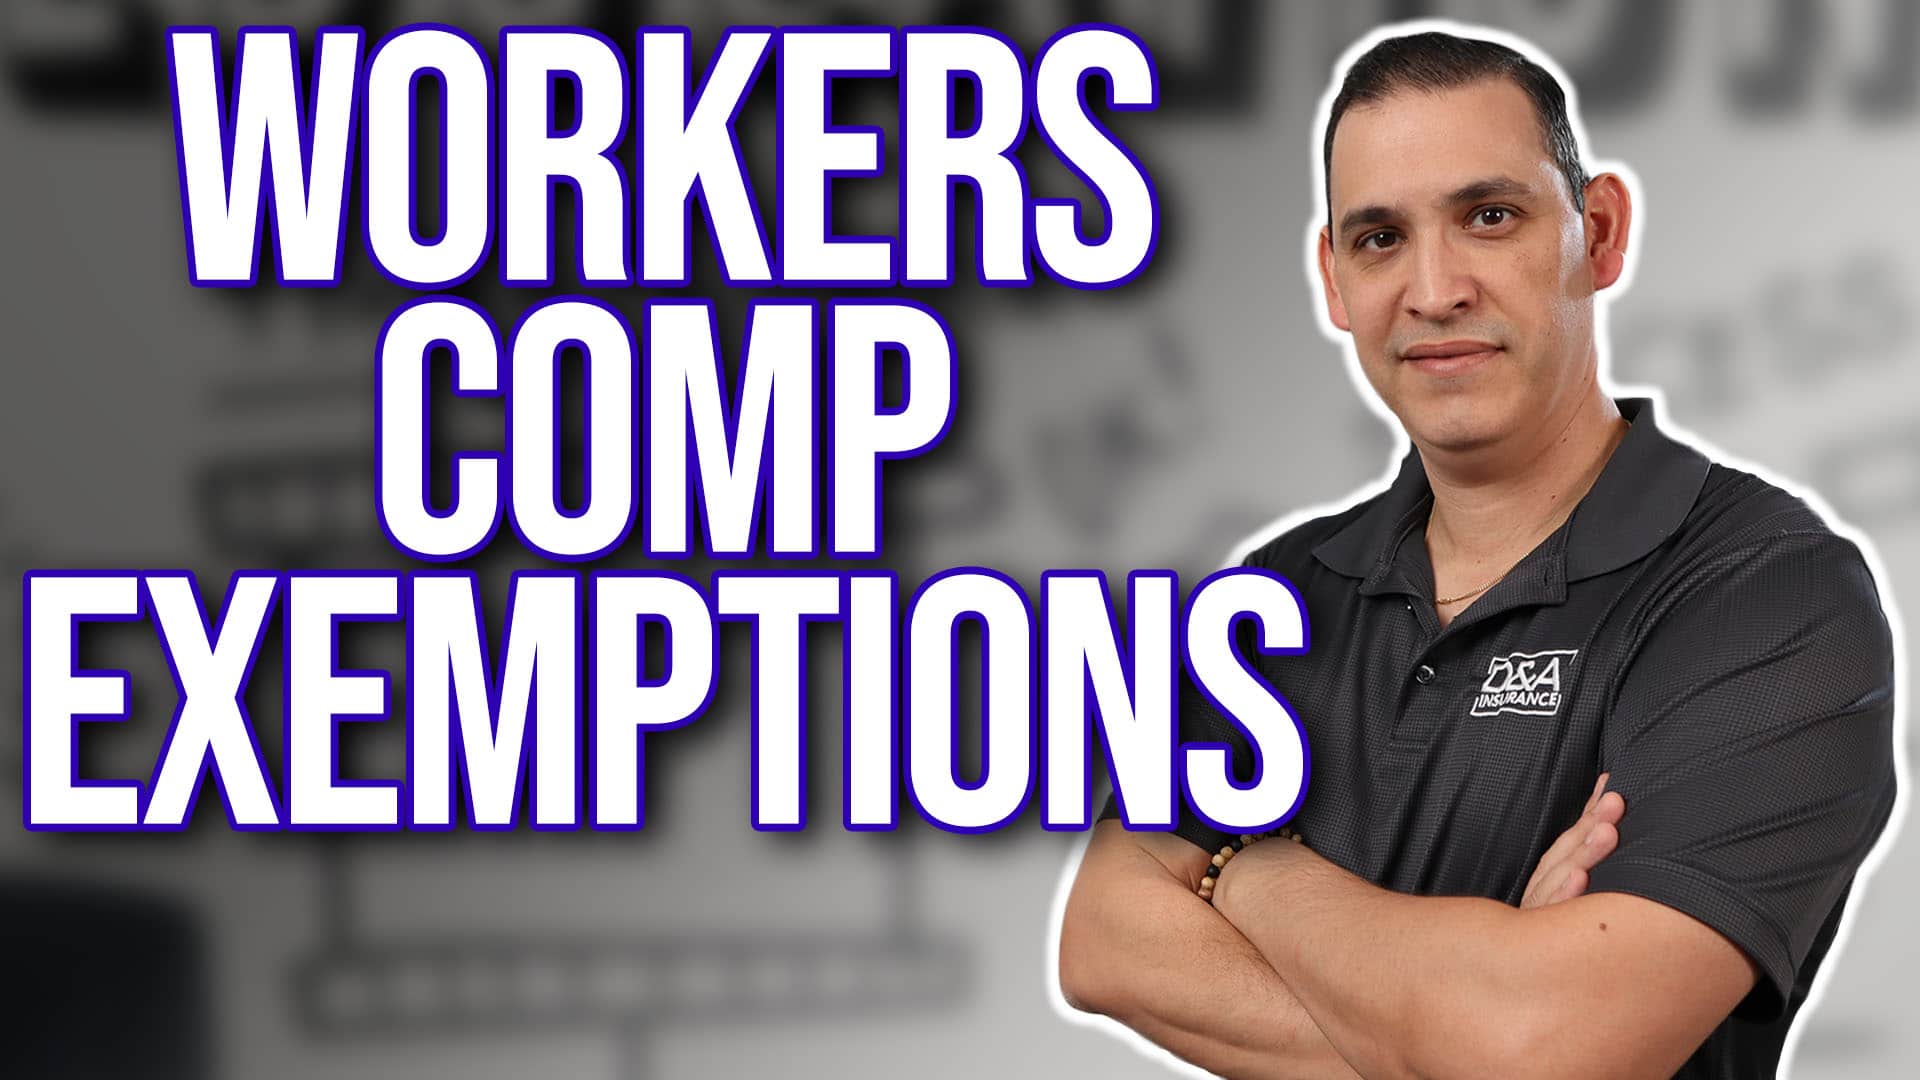 Workers Comp Exemptions